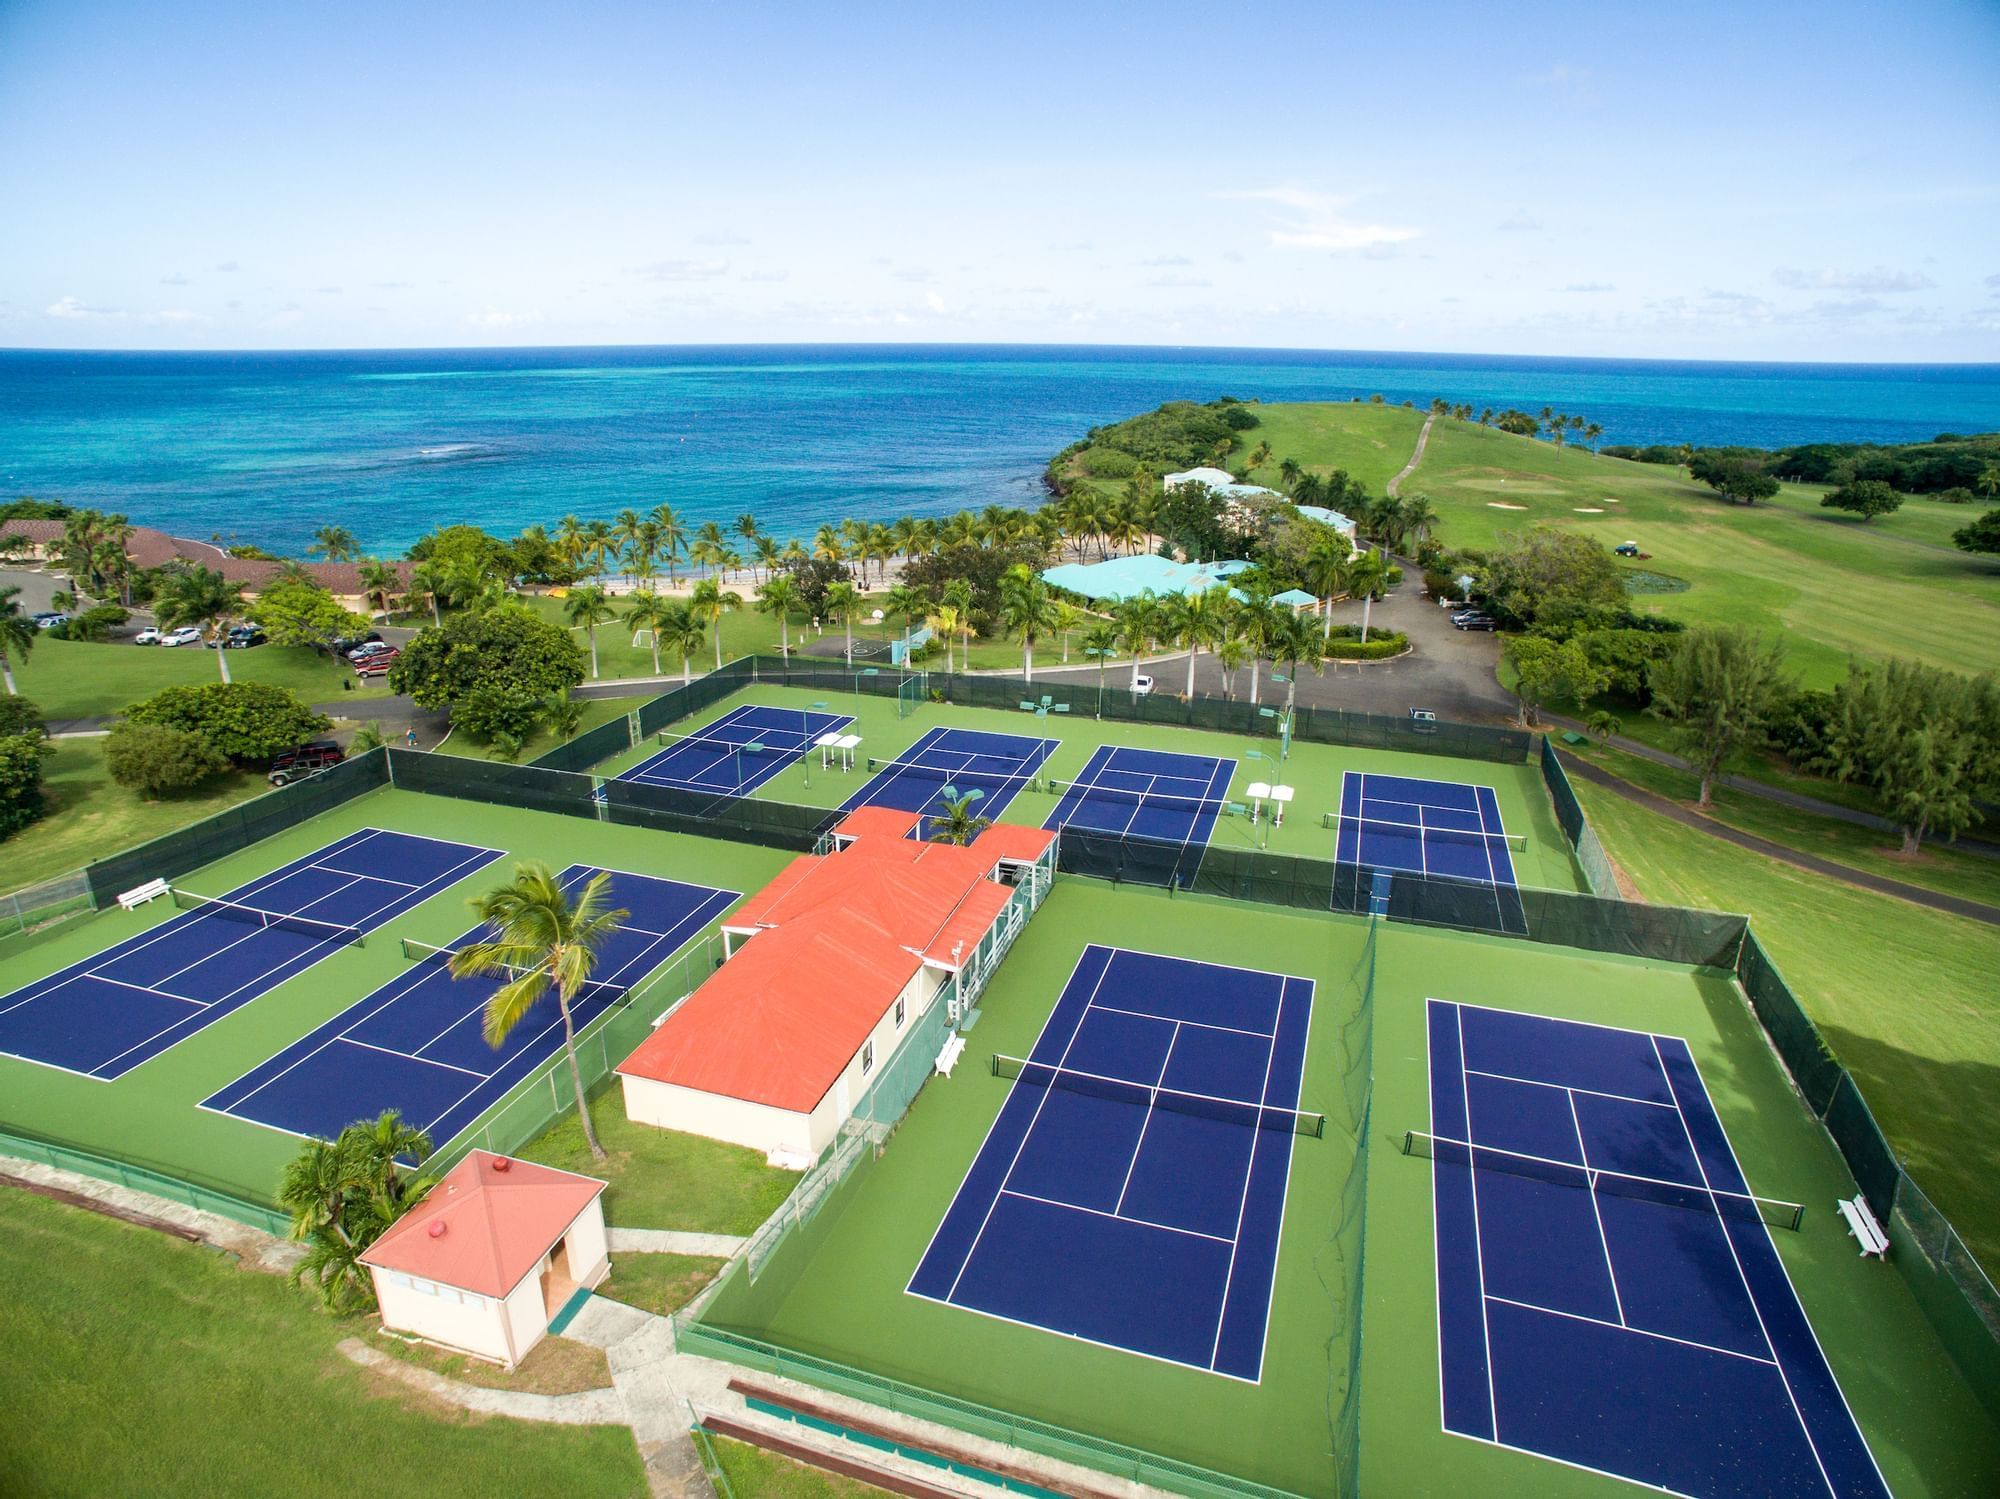 Aerial view of Tennis Courts by the ocean near The Buccaneer